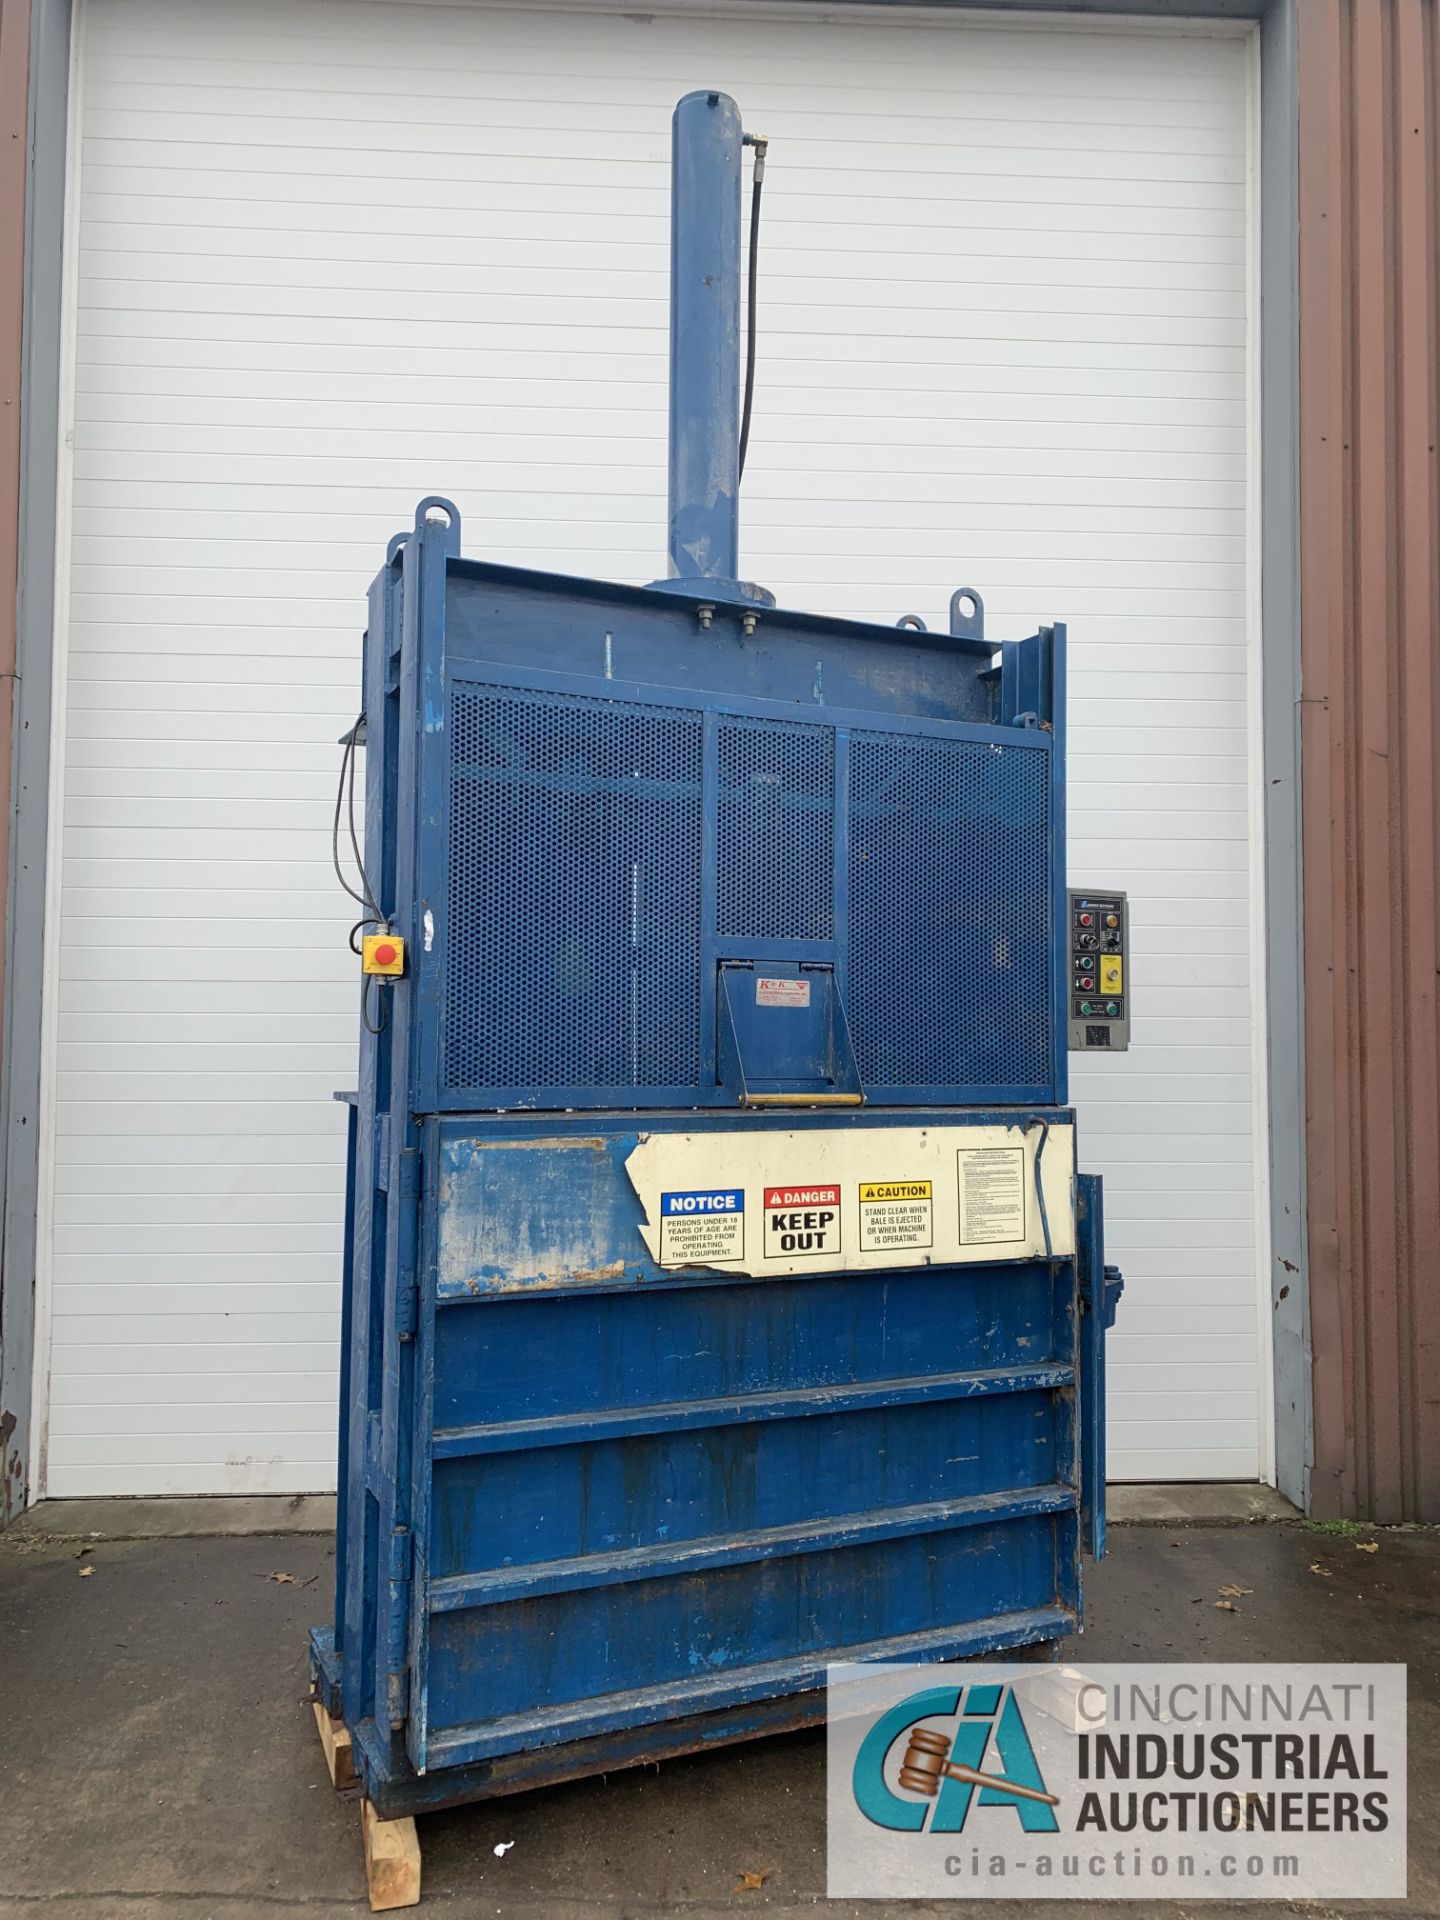 30" X 60" ADVANCED LIFTS MODEL BR-9150E VERTICAL HYDRAULIC BALER - $100.00 Rigging Fee Due to Onsite